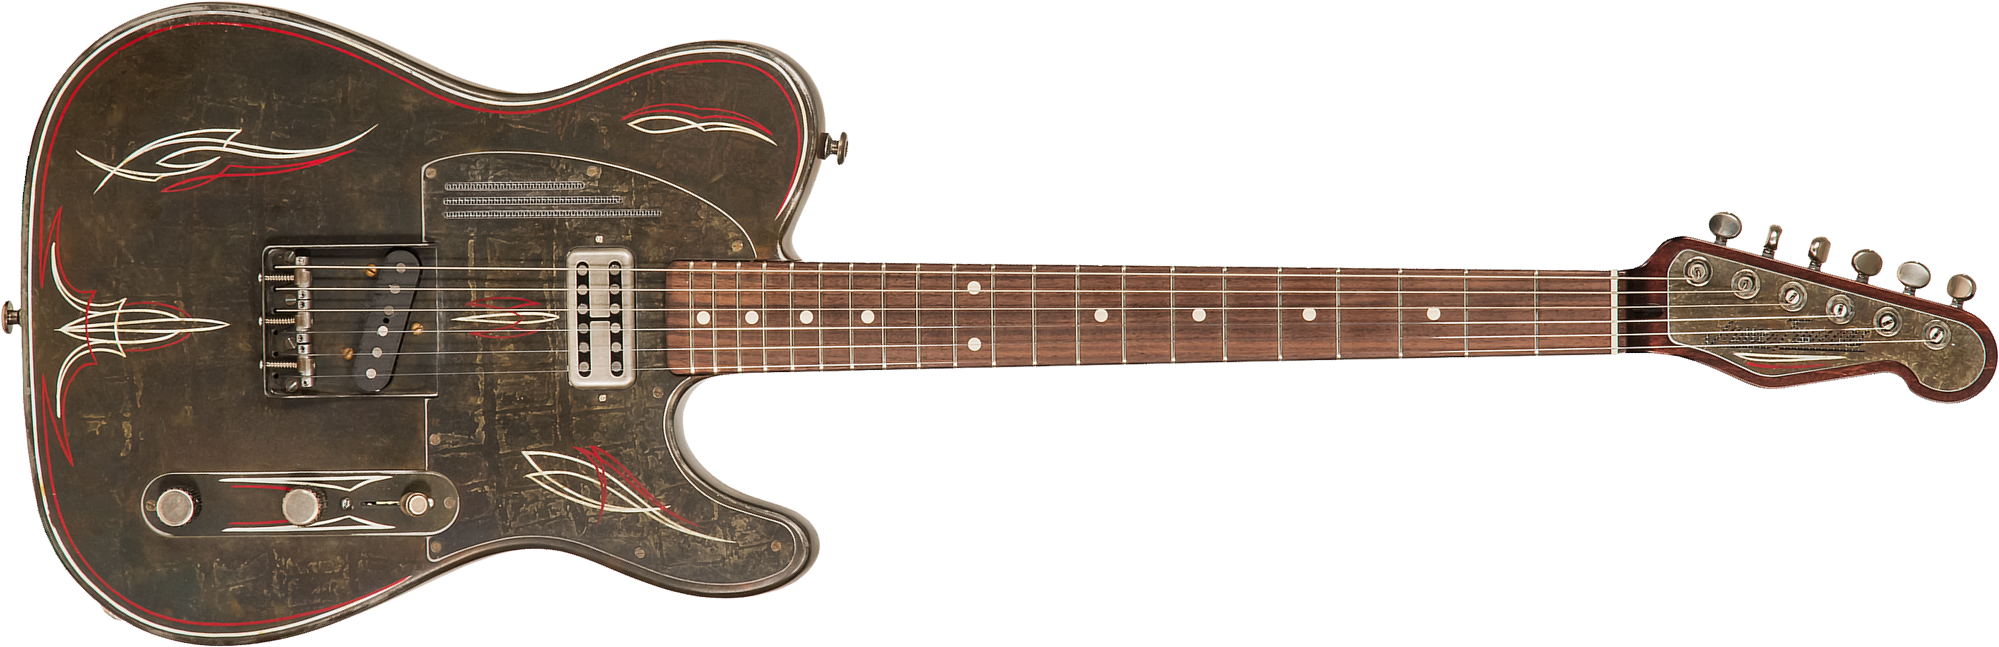 James Trussart Steelcaster Perf.back Sh Tv Jones Ht Rw #21167 - Rust O Matic Pinstriped - Guitare Électrique Forme Tel - Main picture